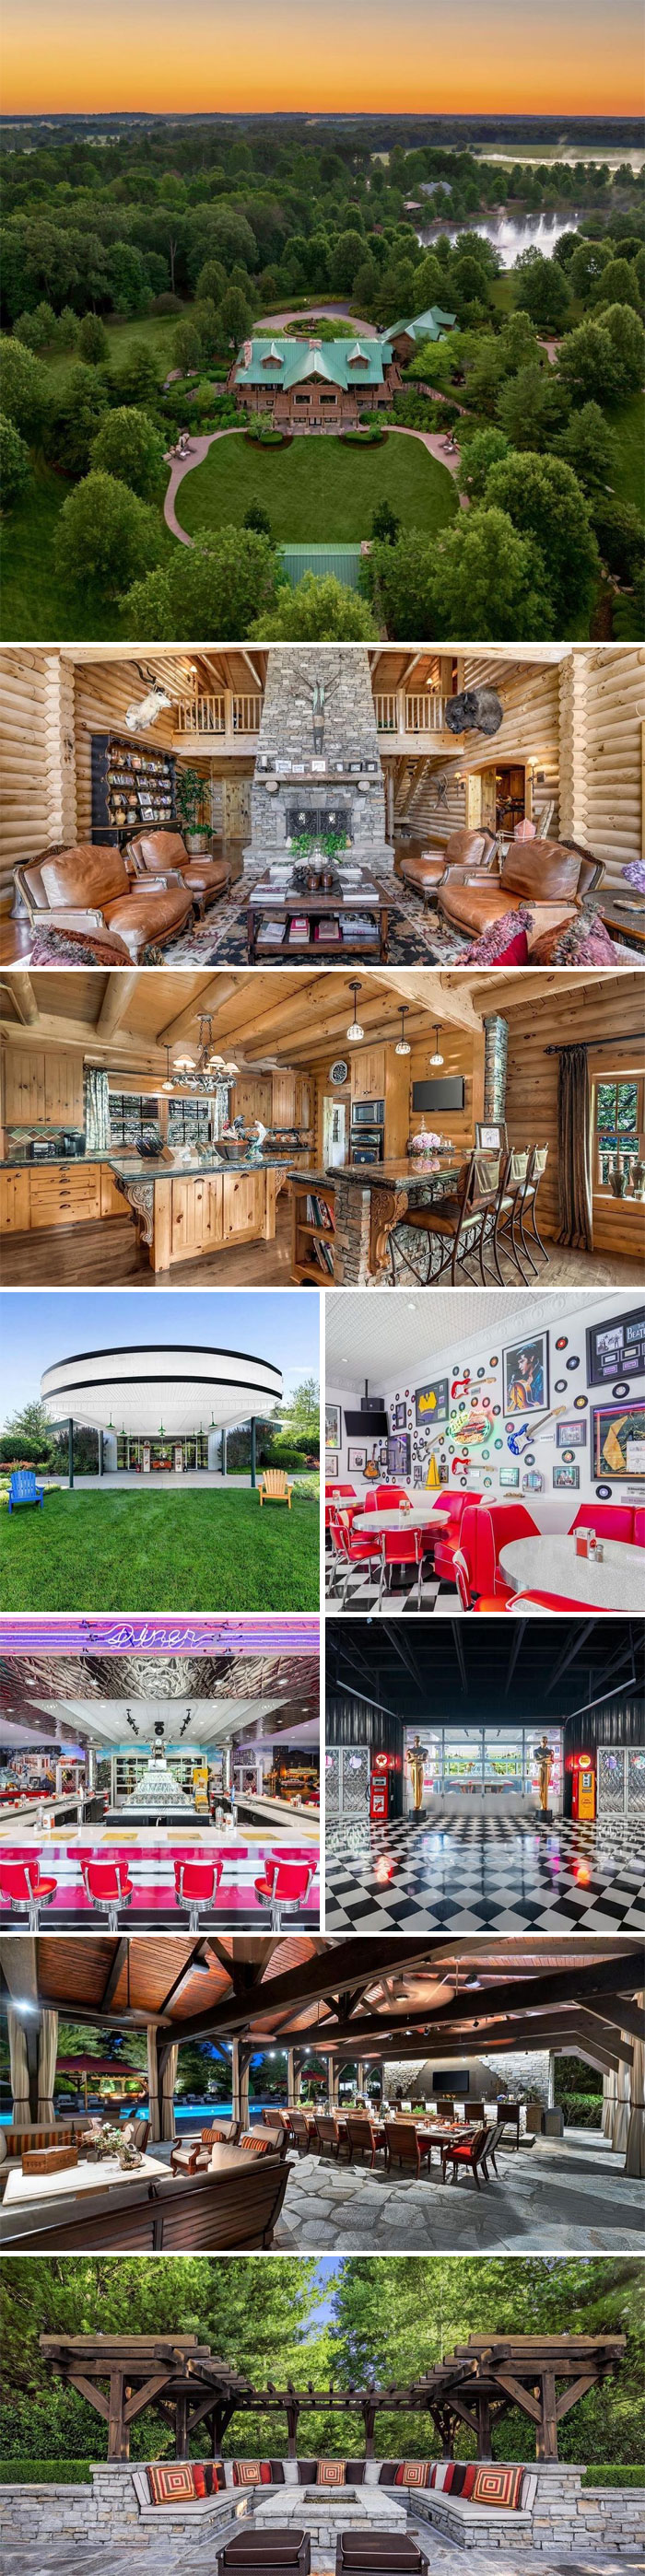 For #zgwmansionmondays Here’s A 550 Acre Home In Santa Claus, In That Combined Has 15 Bd, 19 Ba And Over 50k Sq Ft And Every Amenity You Could Ever Need Including A 3 Story Log Cabin Main Home, 1950s Diner, Classic Car Museum, Pool Pavilion, Shooting Range, Amphitheater, Over 3.5 Miles Of Paved Trails And More . Currently Listed For $47,900,000